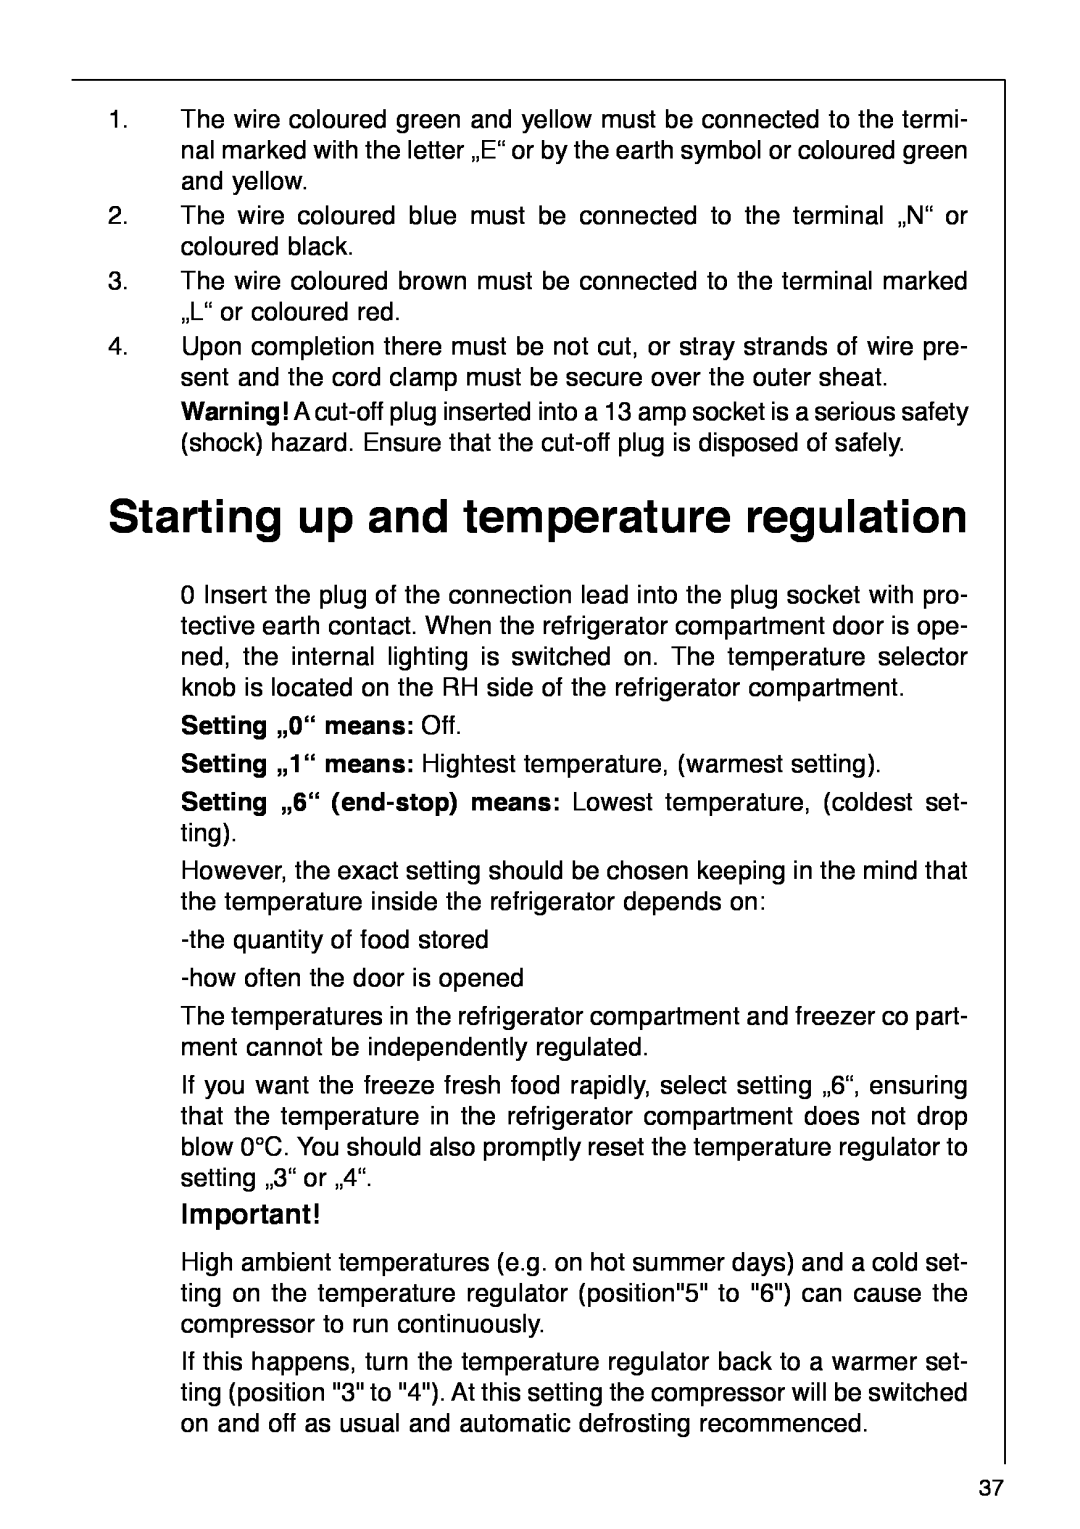 AEG 290-6I installation instructions Starting up and temperature regulation, Setting ã0Ò means Off 